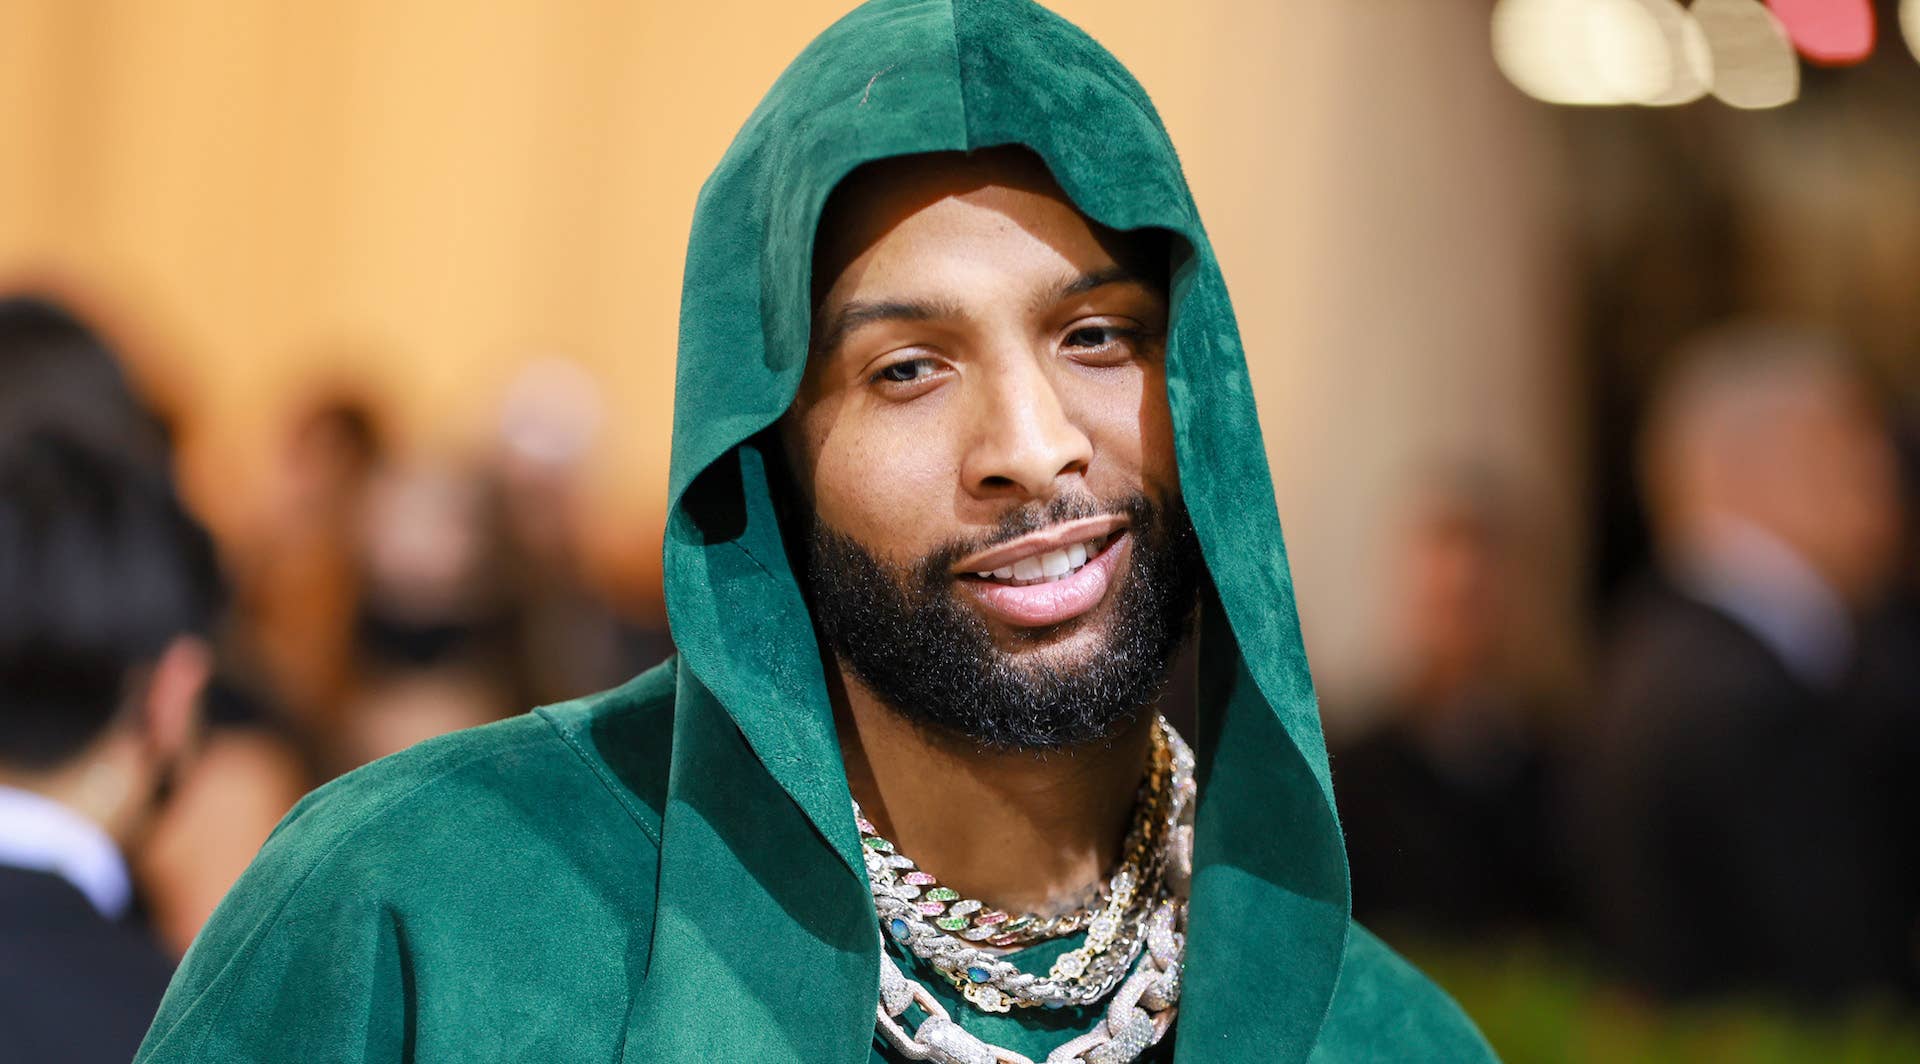 Why was Odell Beckham Jr. dressed like that at the Met Gala? - Los